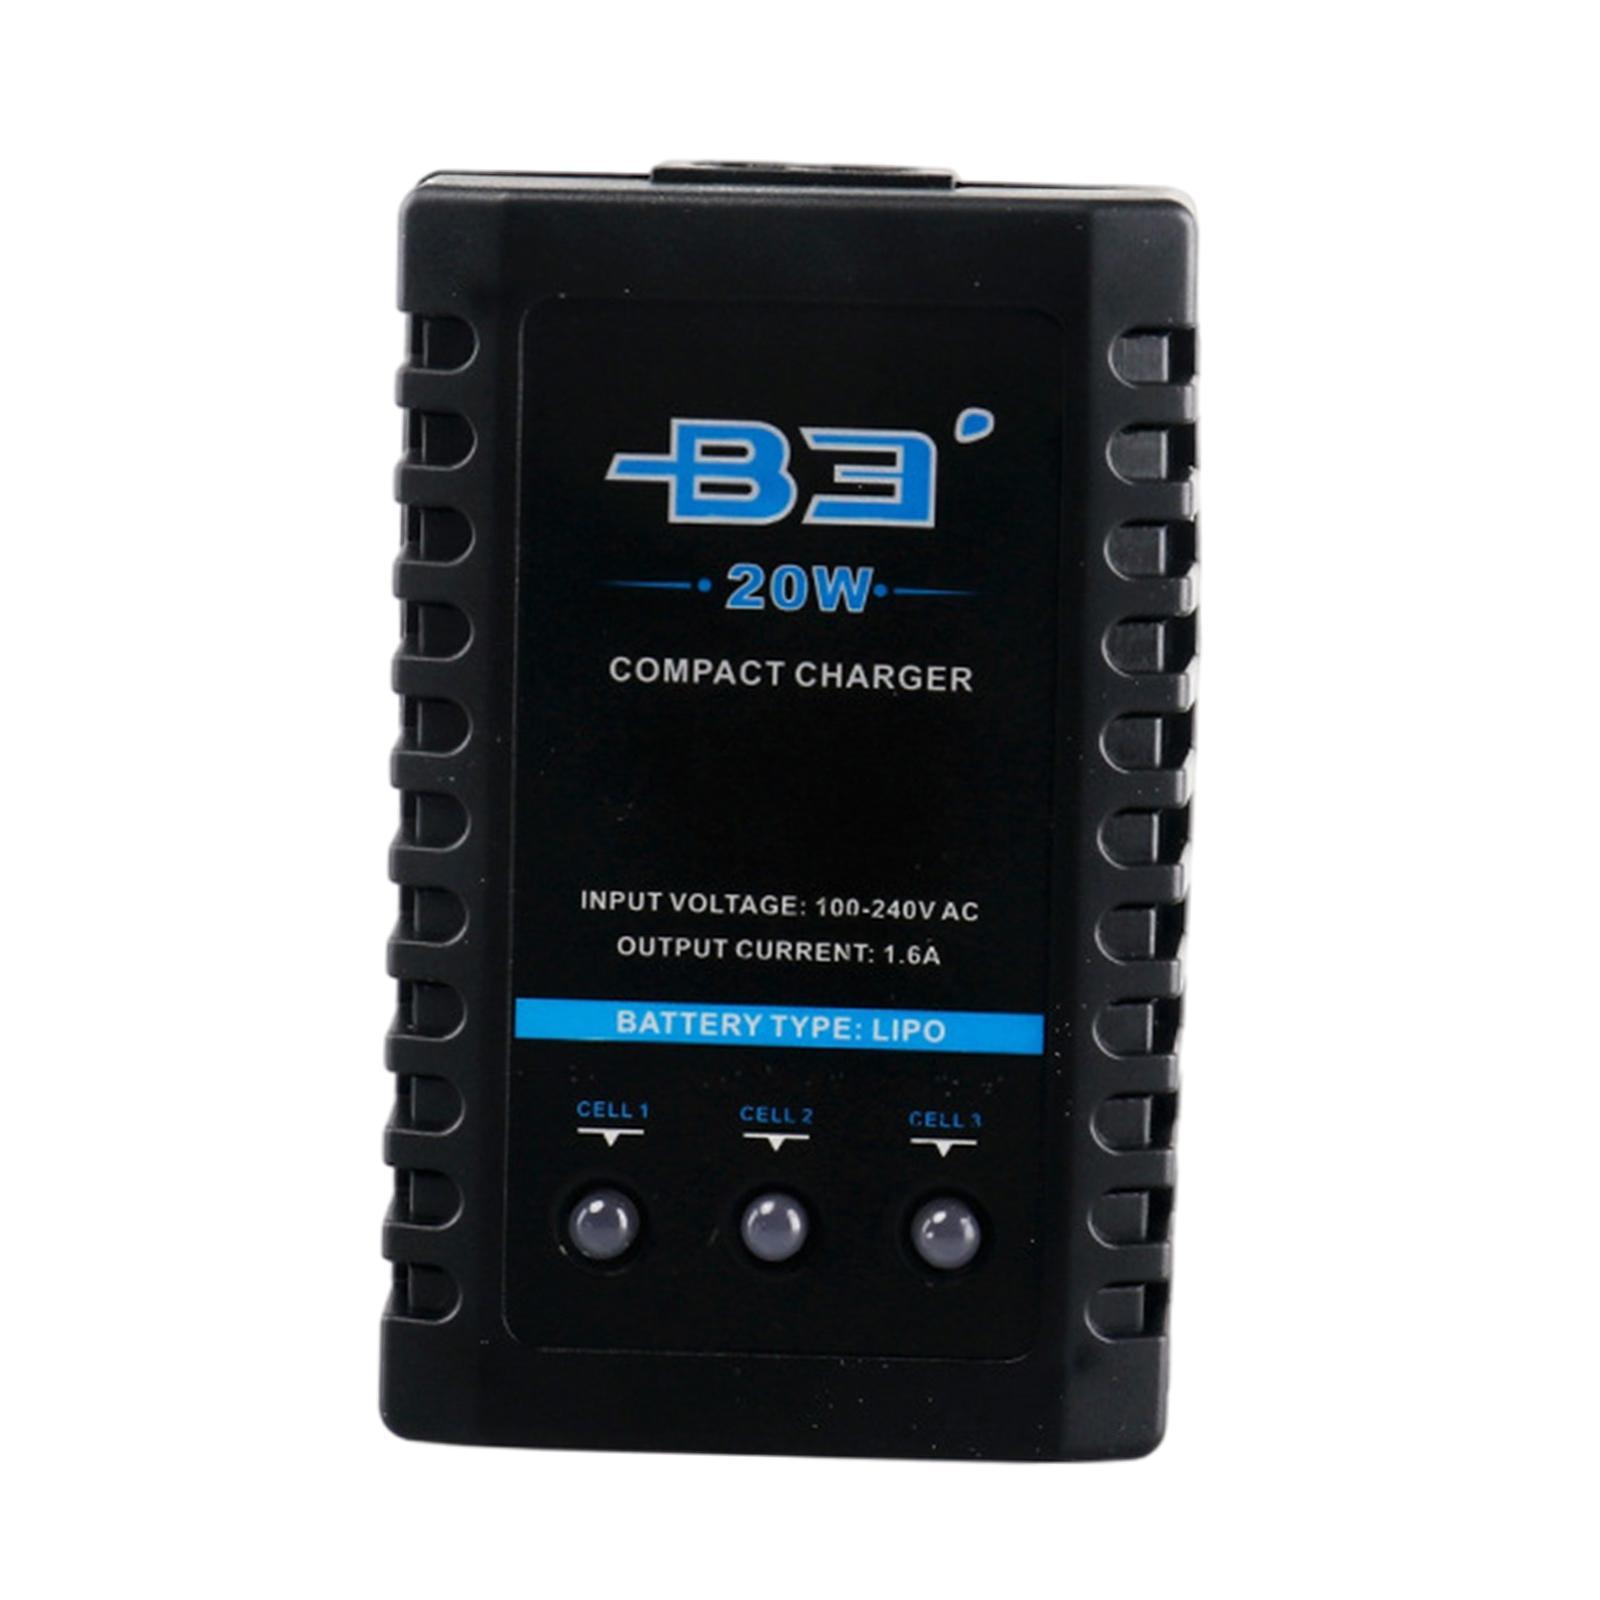 B3 RC 20W Balance Charger 1.6A for 2S 3S 7.4V 11.1V Lithium -EU